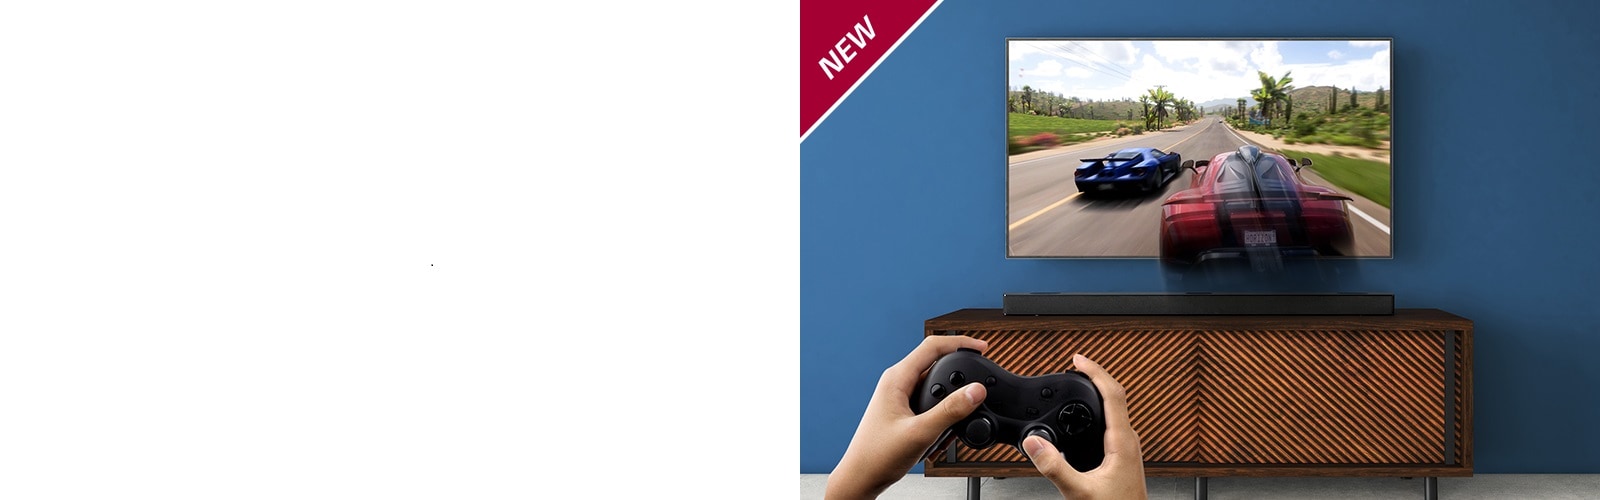 LG TV is on the wall, showing a racing game. LG Sound Bar is place on the brown shelf, right below LG TV. A man is holding a joy stick. NEW mark is shown in the top left corner.